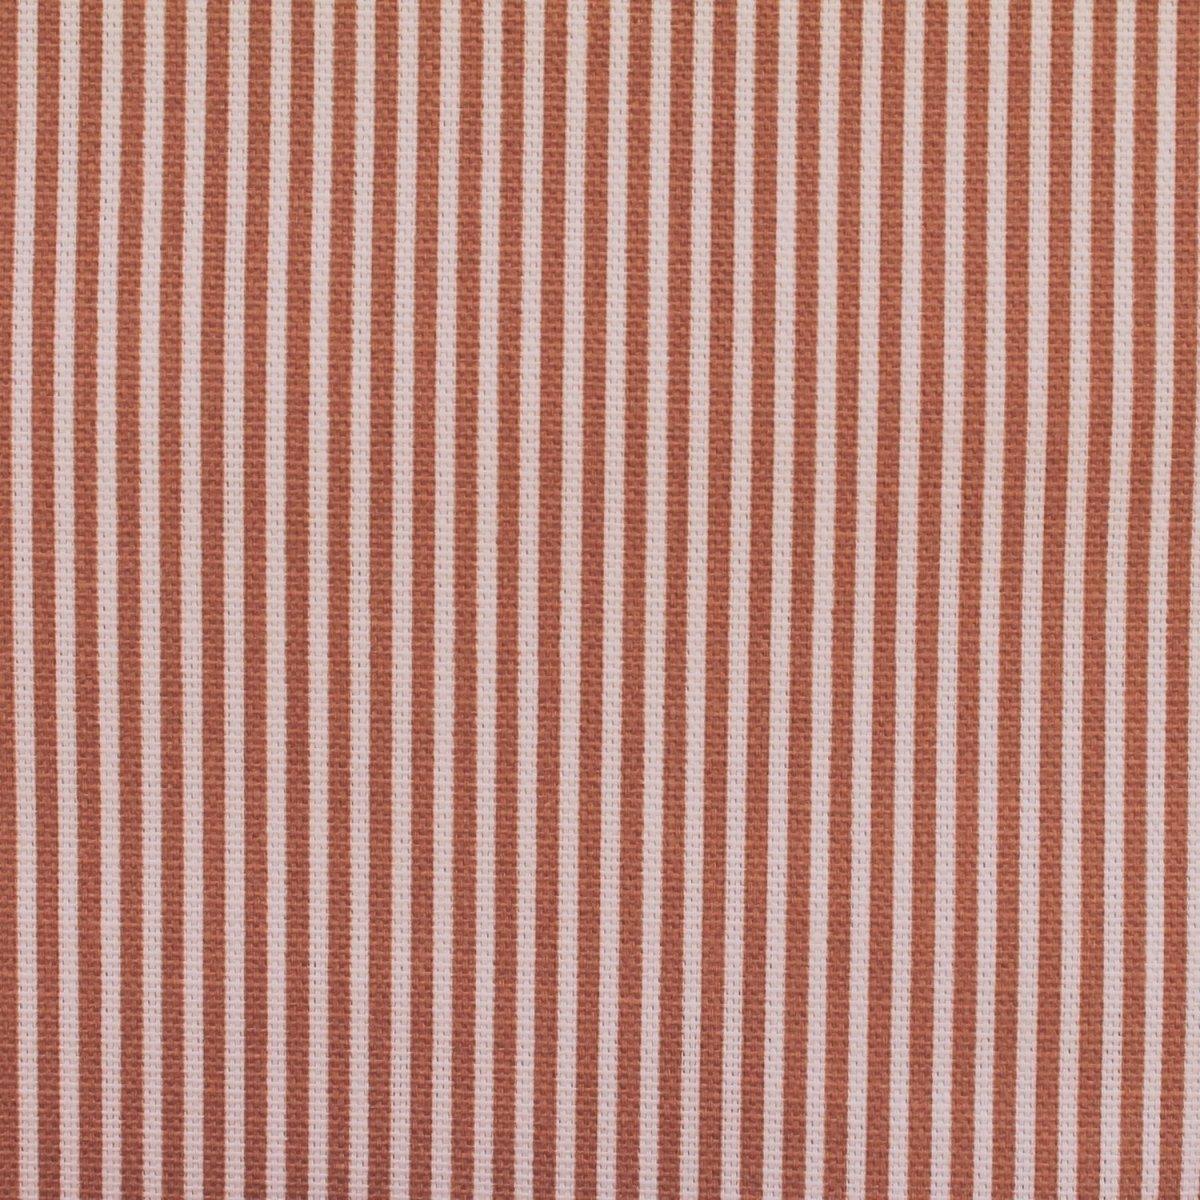 Ticking Fabric Cotton Canvas Duck Honey Faded Brick Red